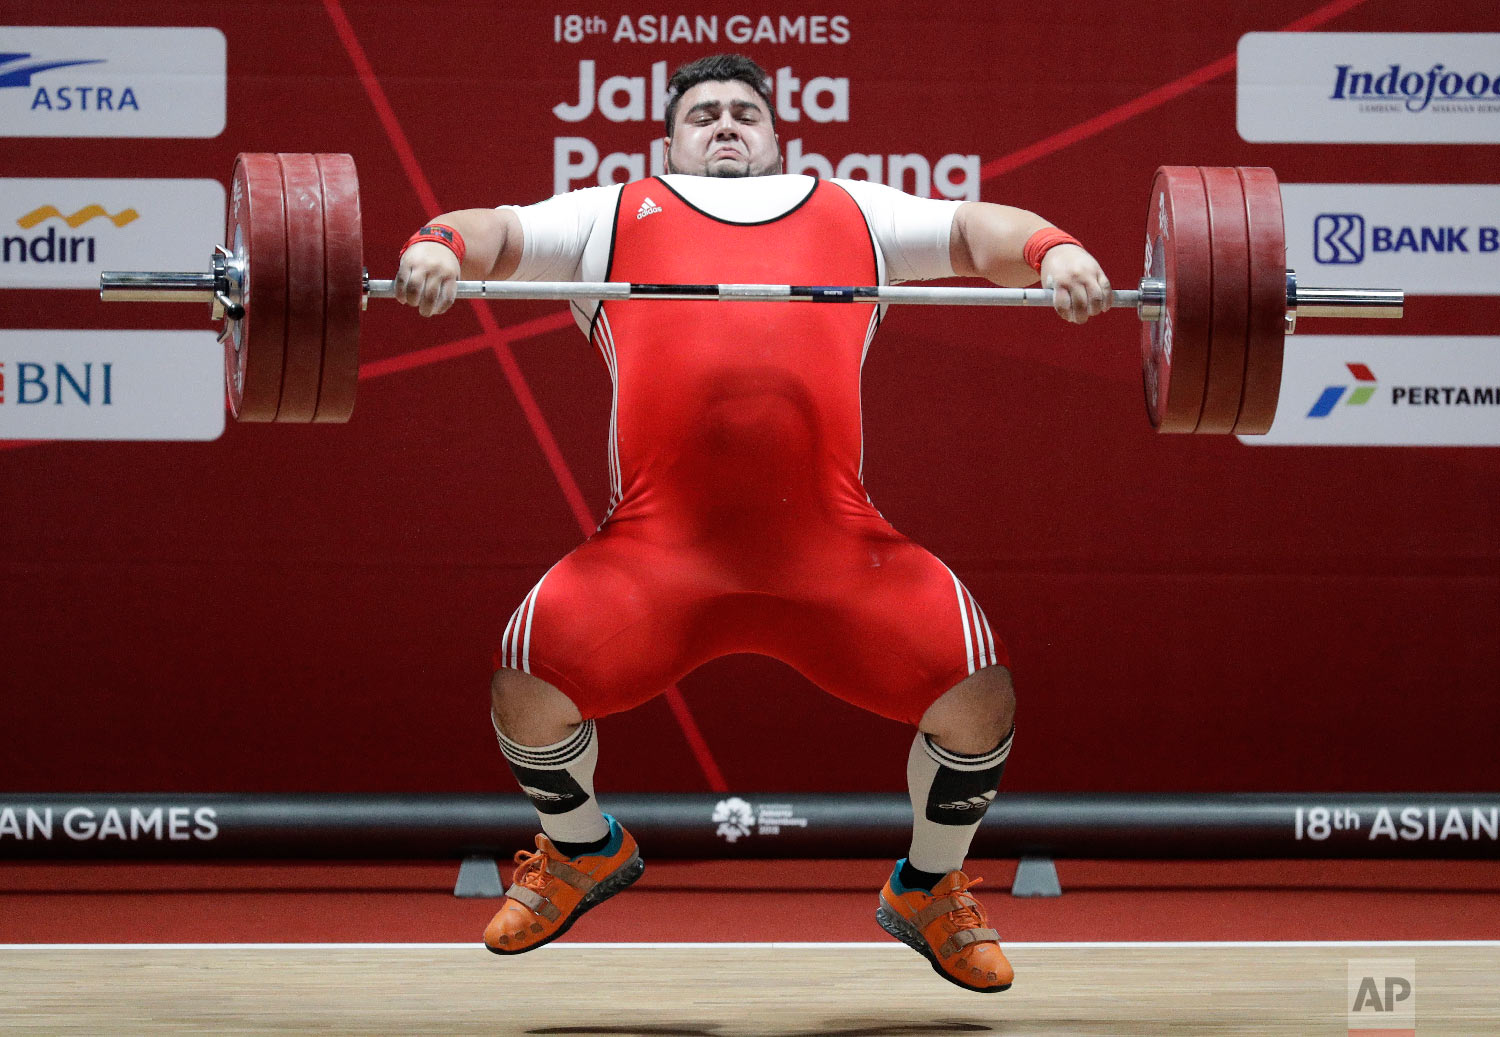  Pakistan's Muhammad Nooh Butt compete at the men's +105kg weightlifting at the 18th Asian Games in Jakarta, Indonesia, Monday, Aug. 27, 2018. (AP Photo/Aaron Favila) 